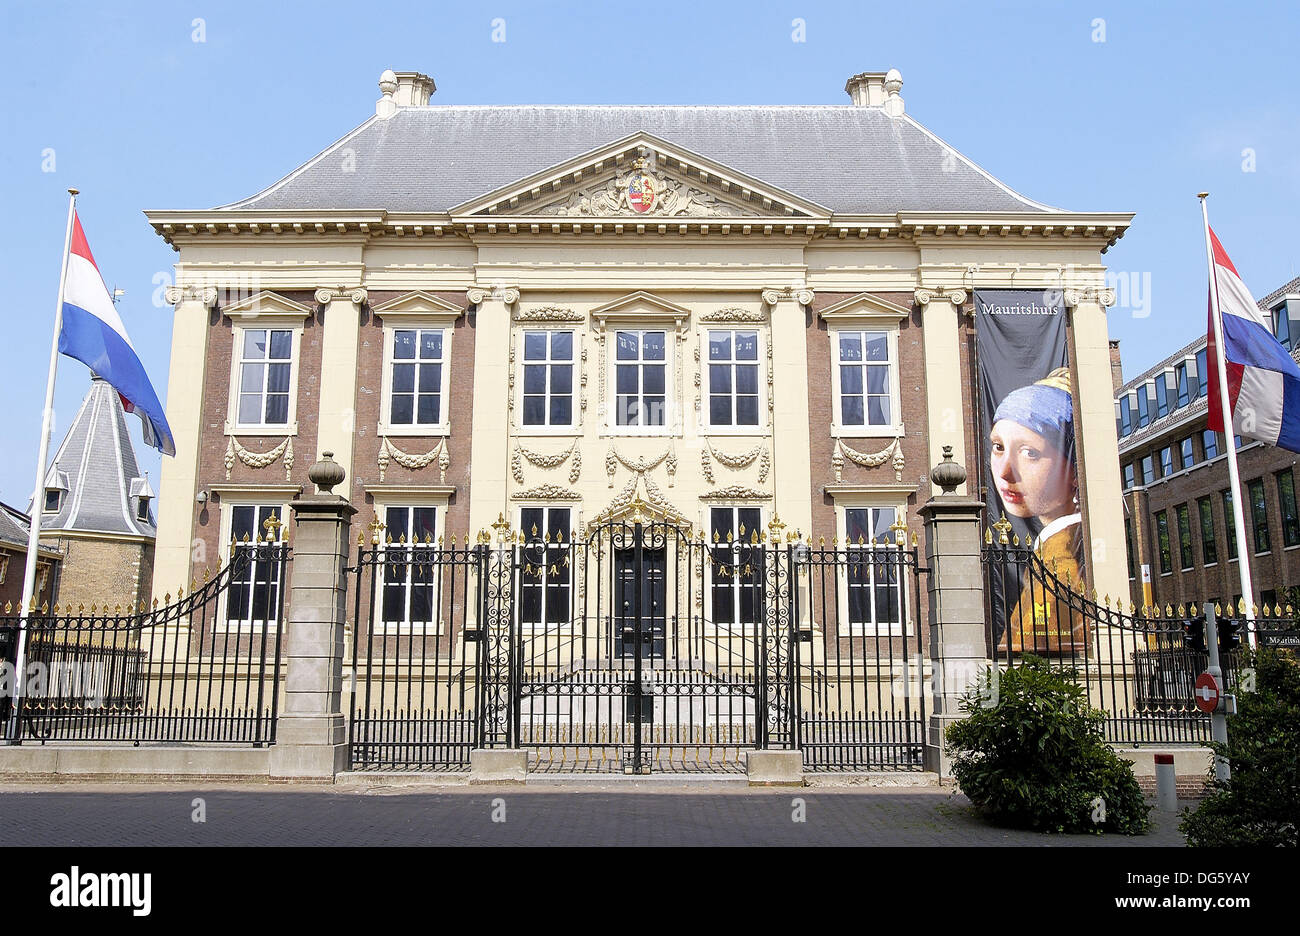 Royal Picture Gallery, housed in the building known as the Mauritshuis (1633-44). The Hague. Netherlands Stock Photo